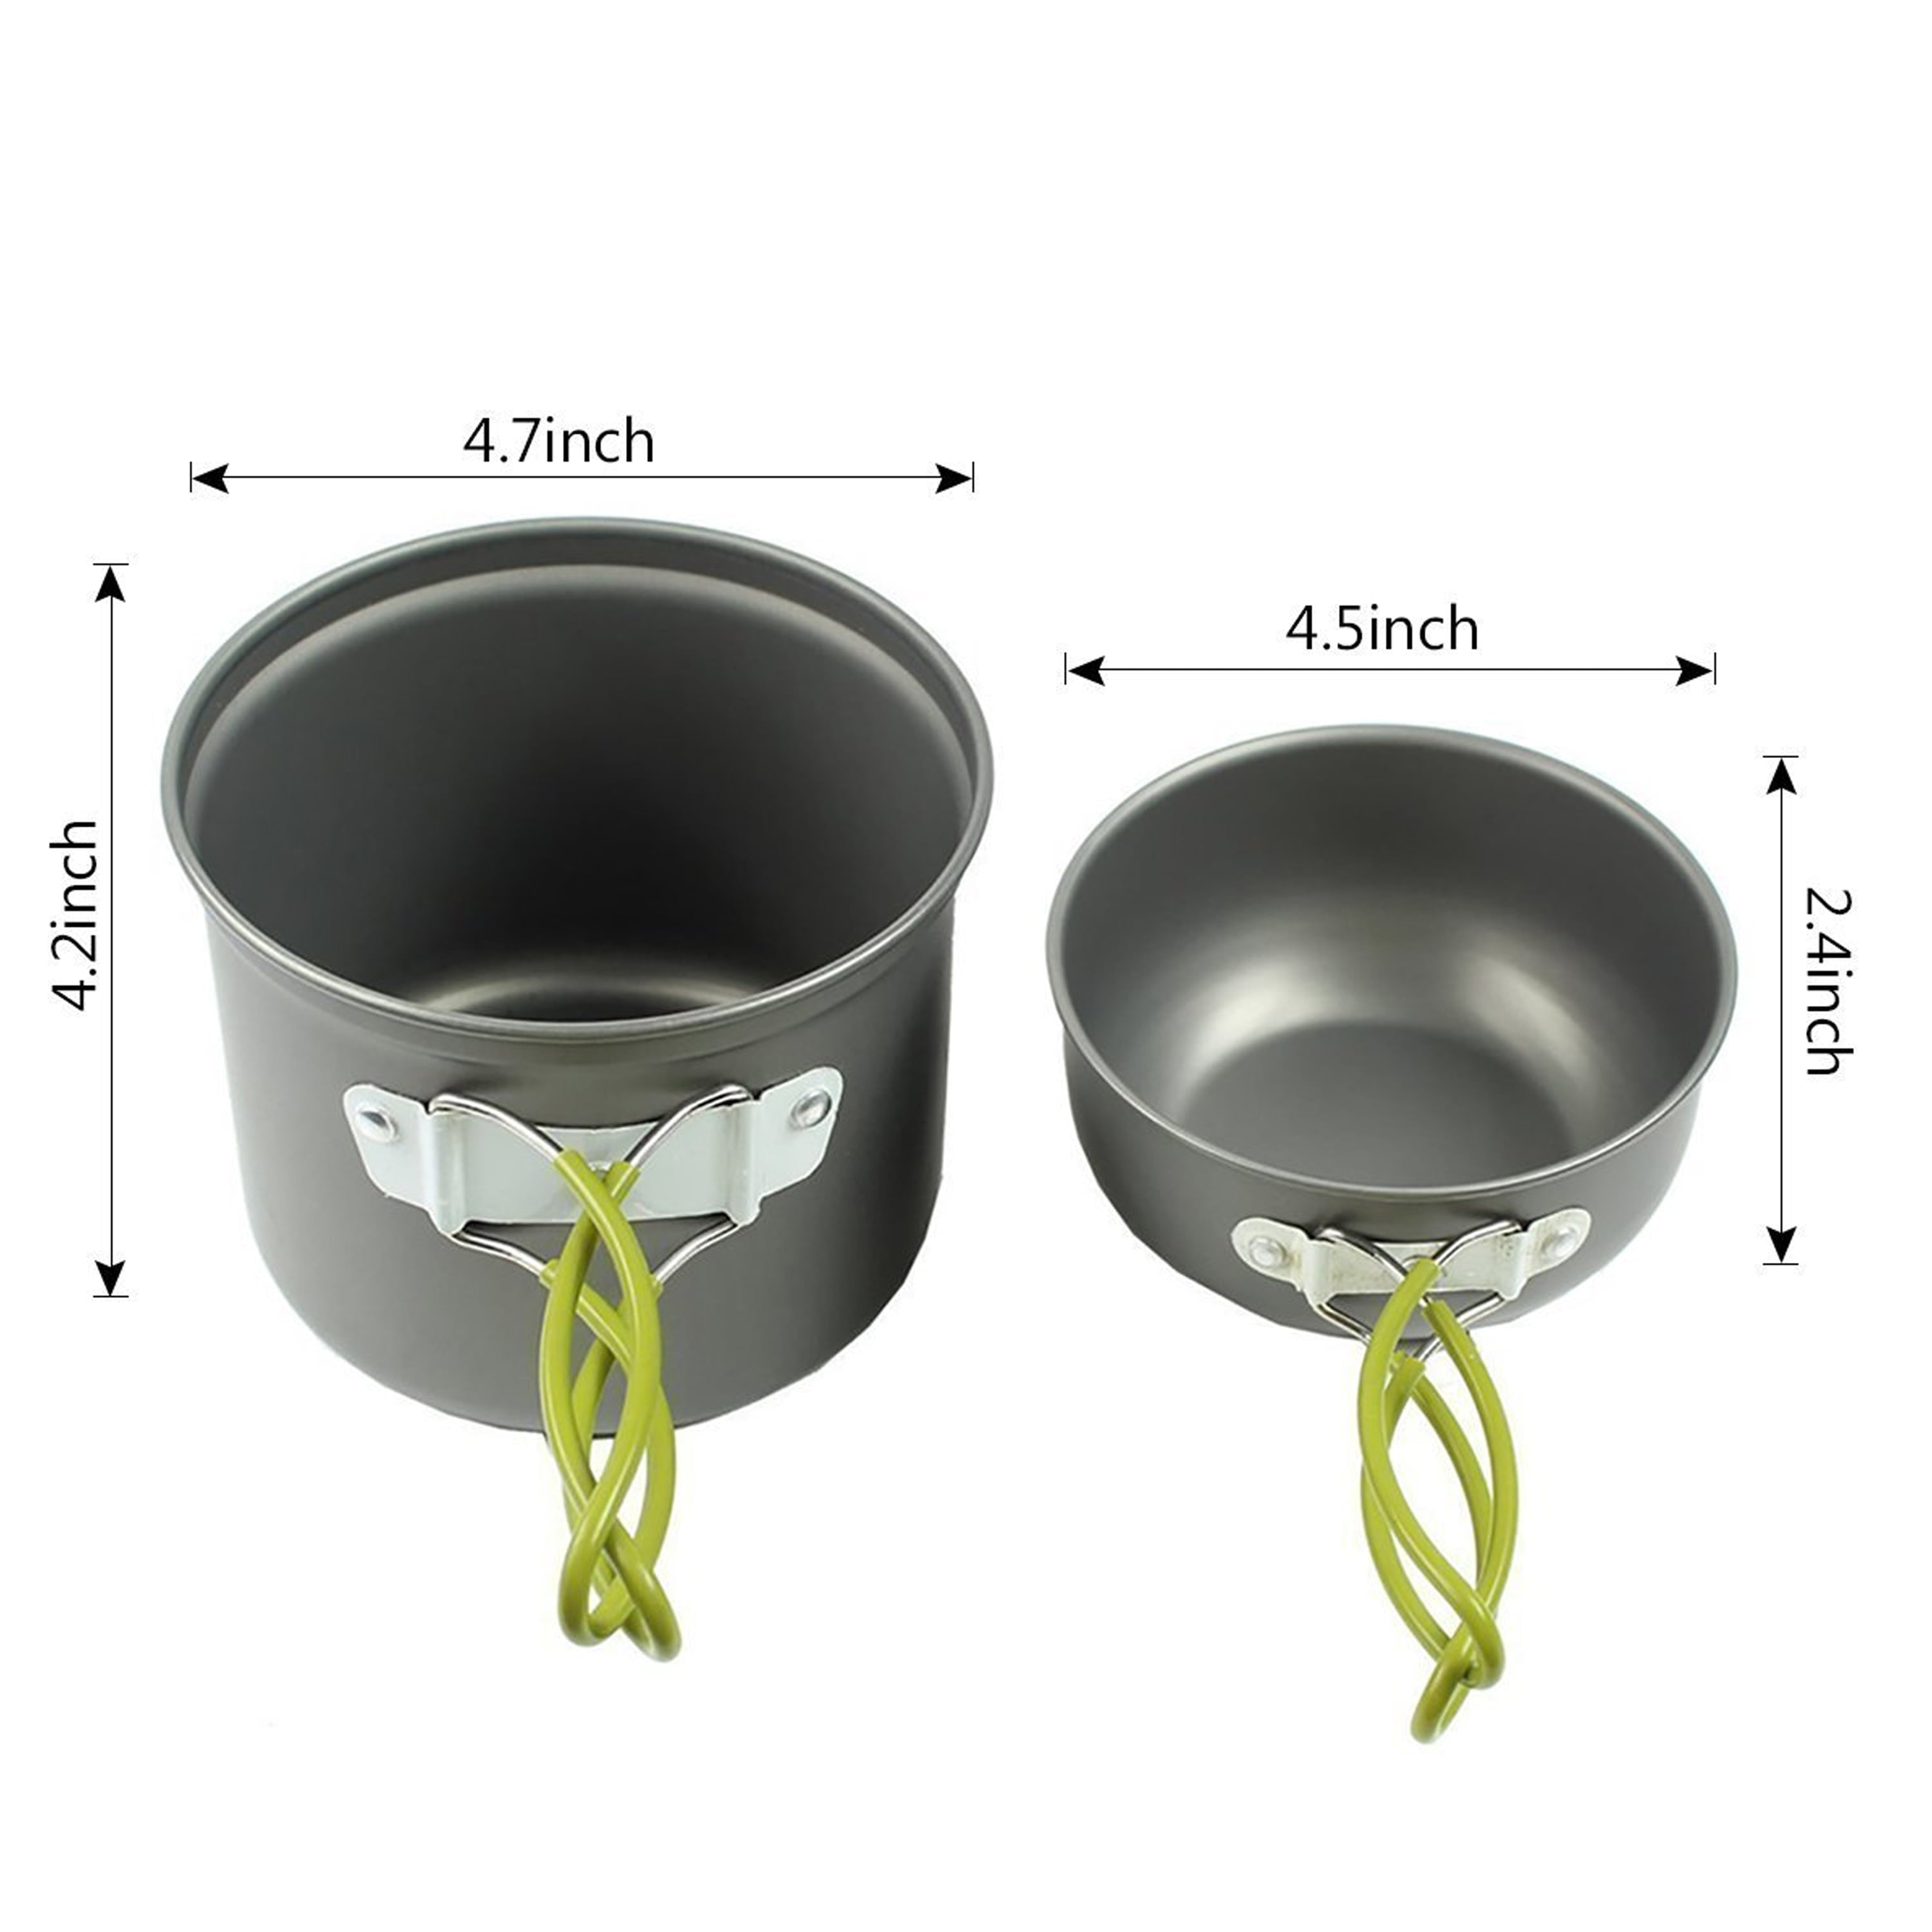 13 PCS Camping Cookware Mess Kit Campfire Kettle Outdoor Hiking Backpacking Picnic Cooking Pot Pan Bowl, Mini Stove, Stainless Steel Cup, Knife Spoon Set